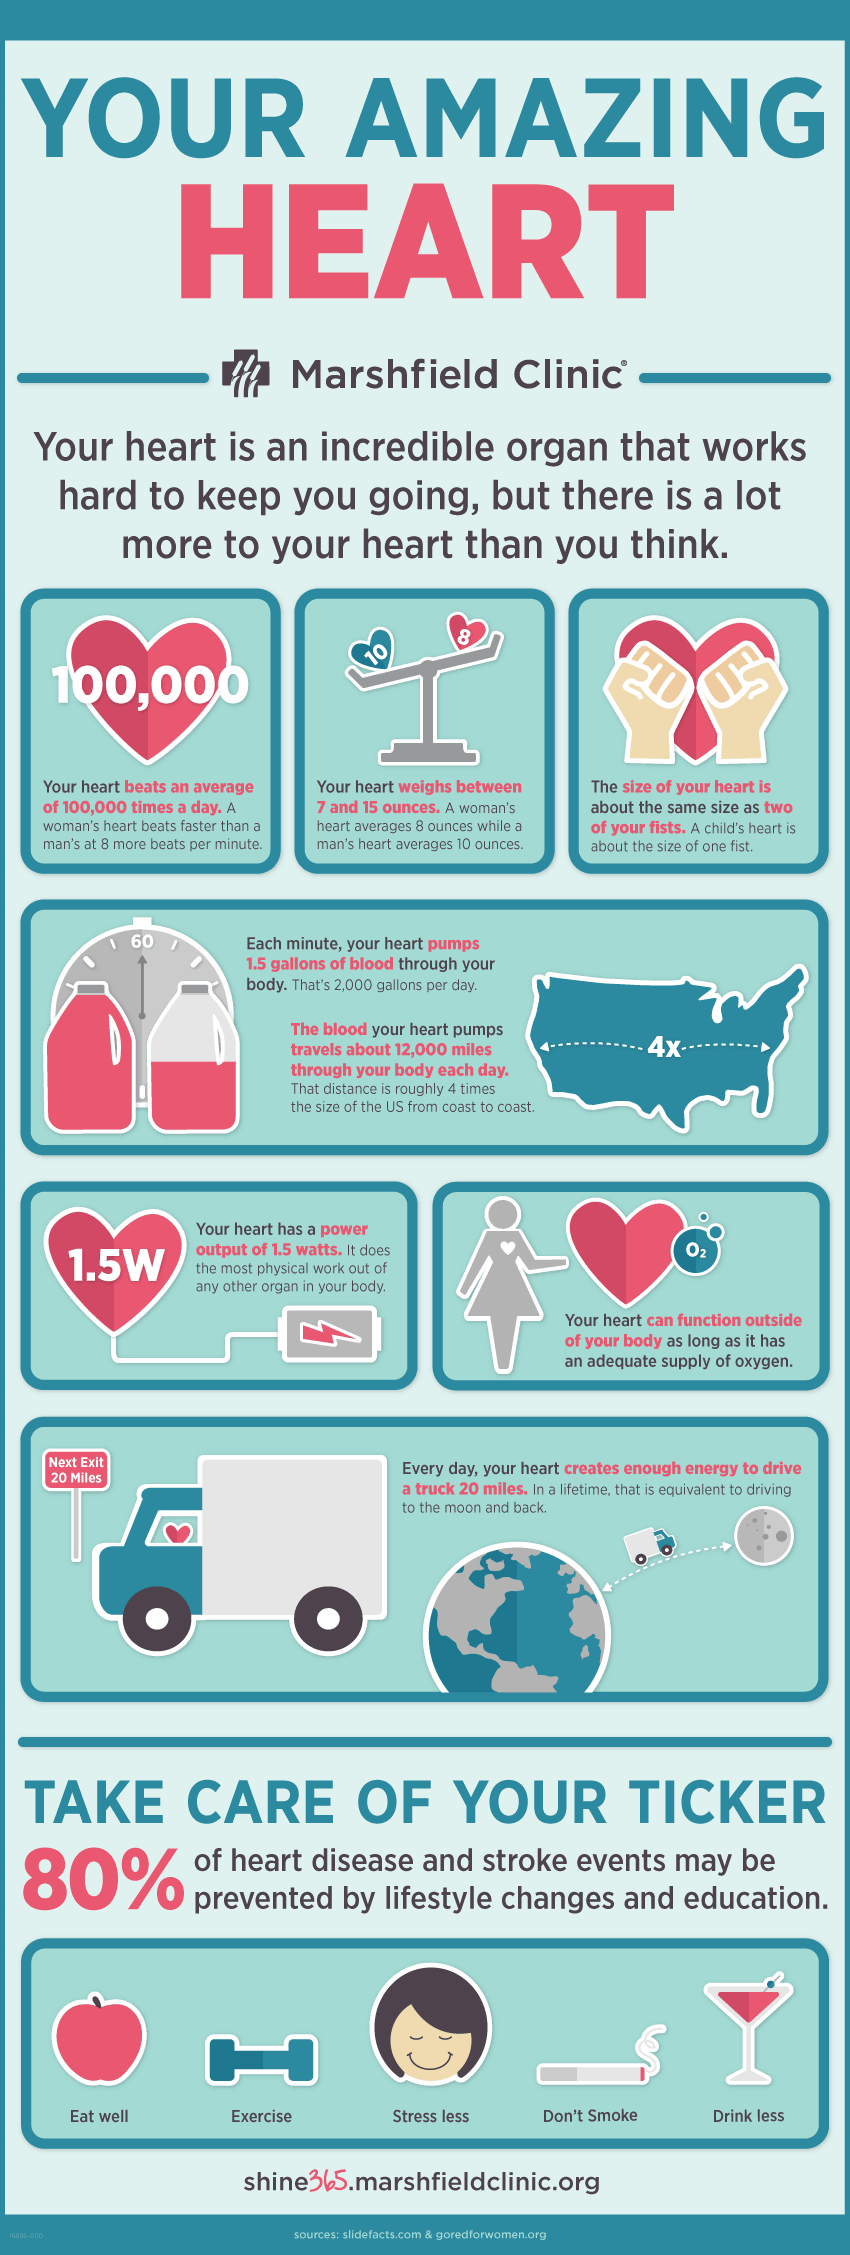 Amazing facts about your heart - infographic